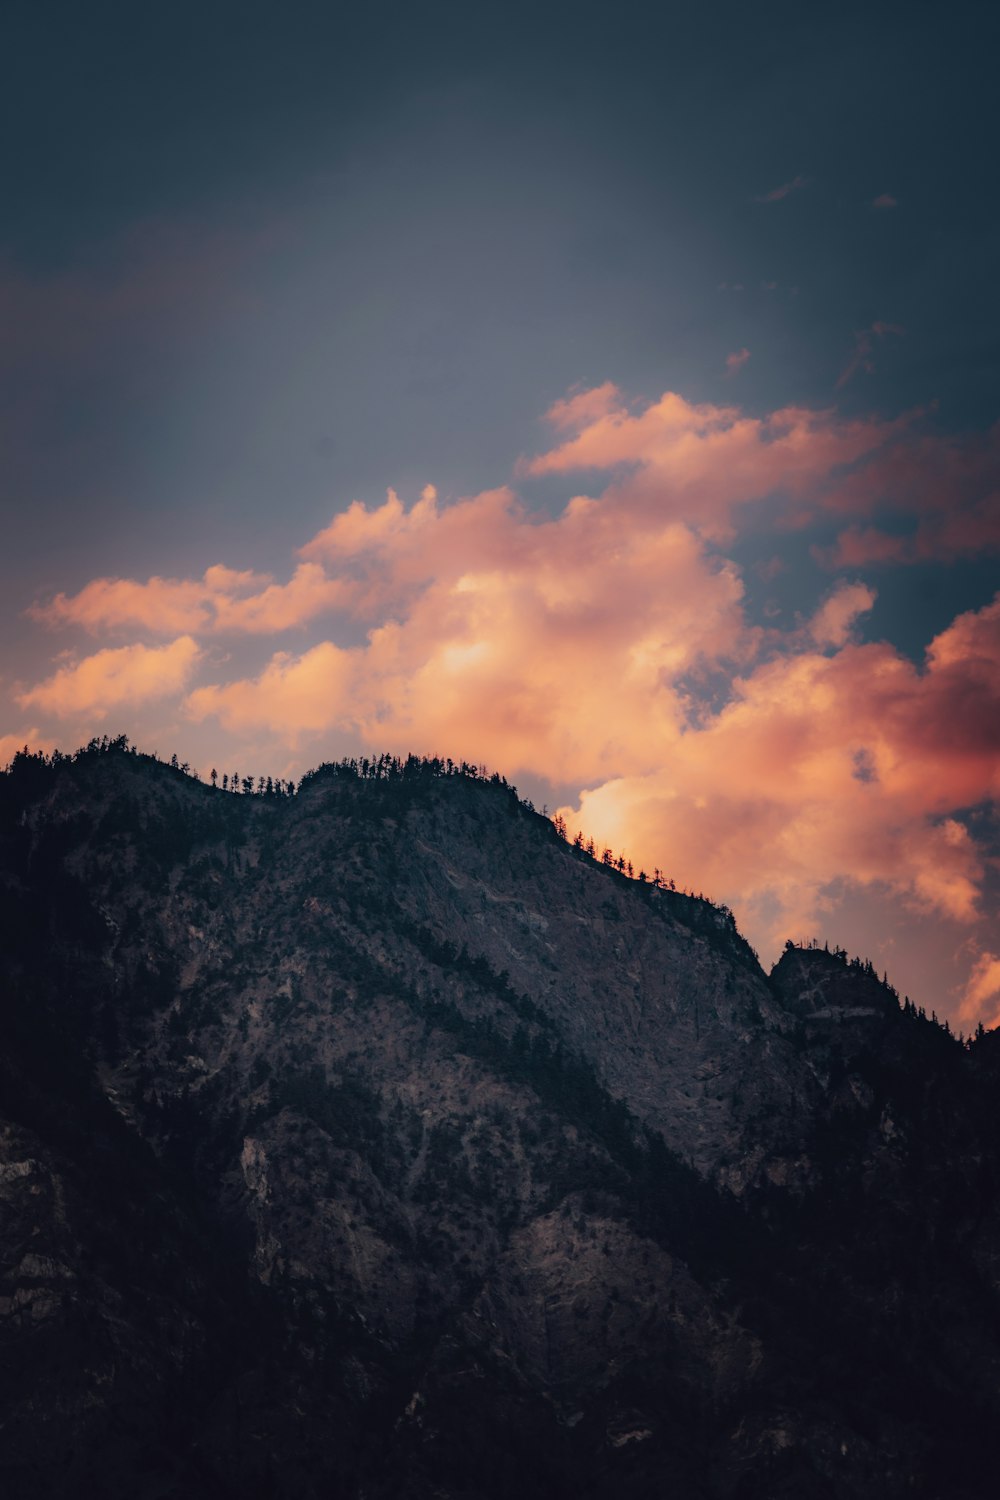 green and brown mountain under cloudy sky during sunset